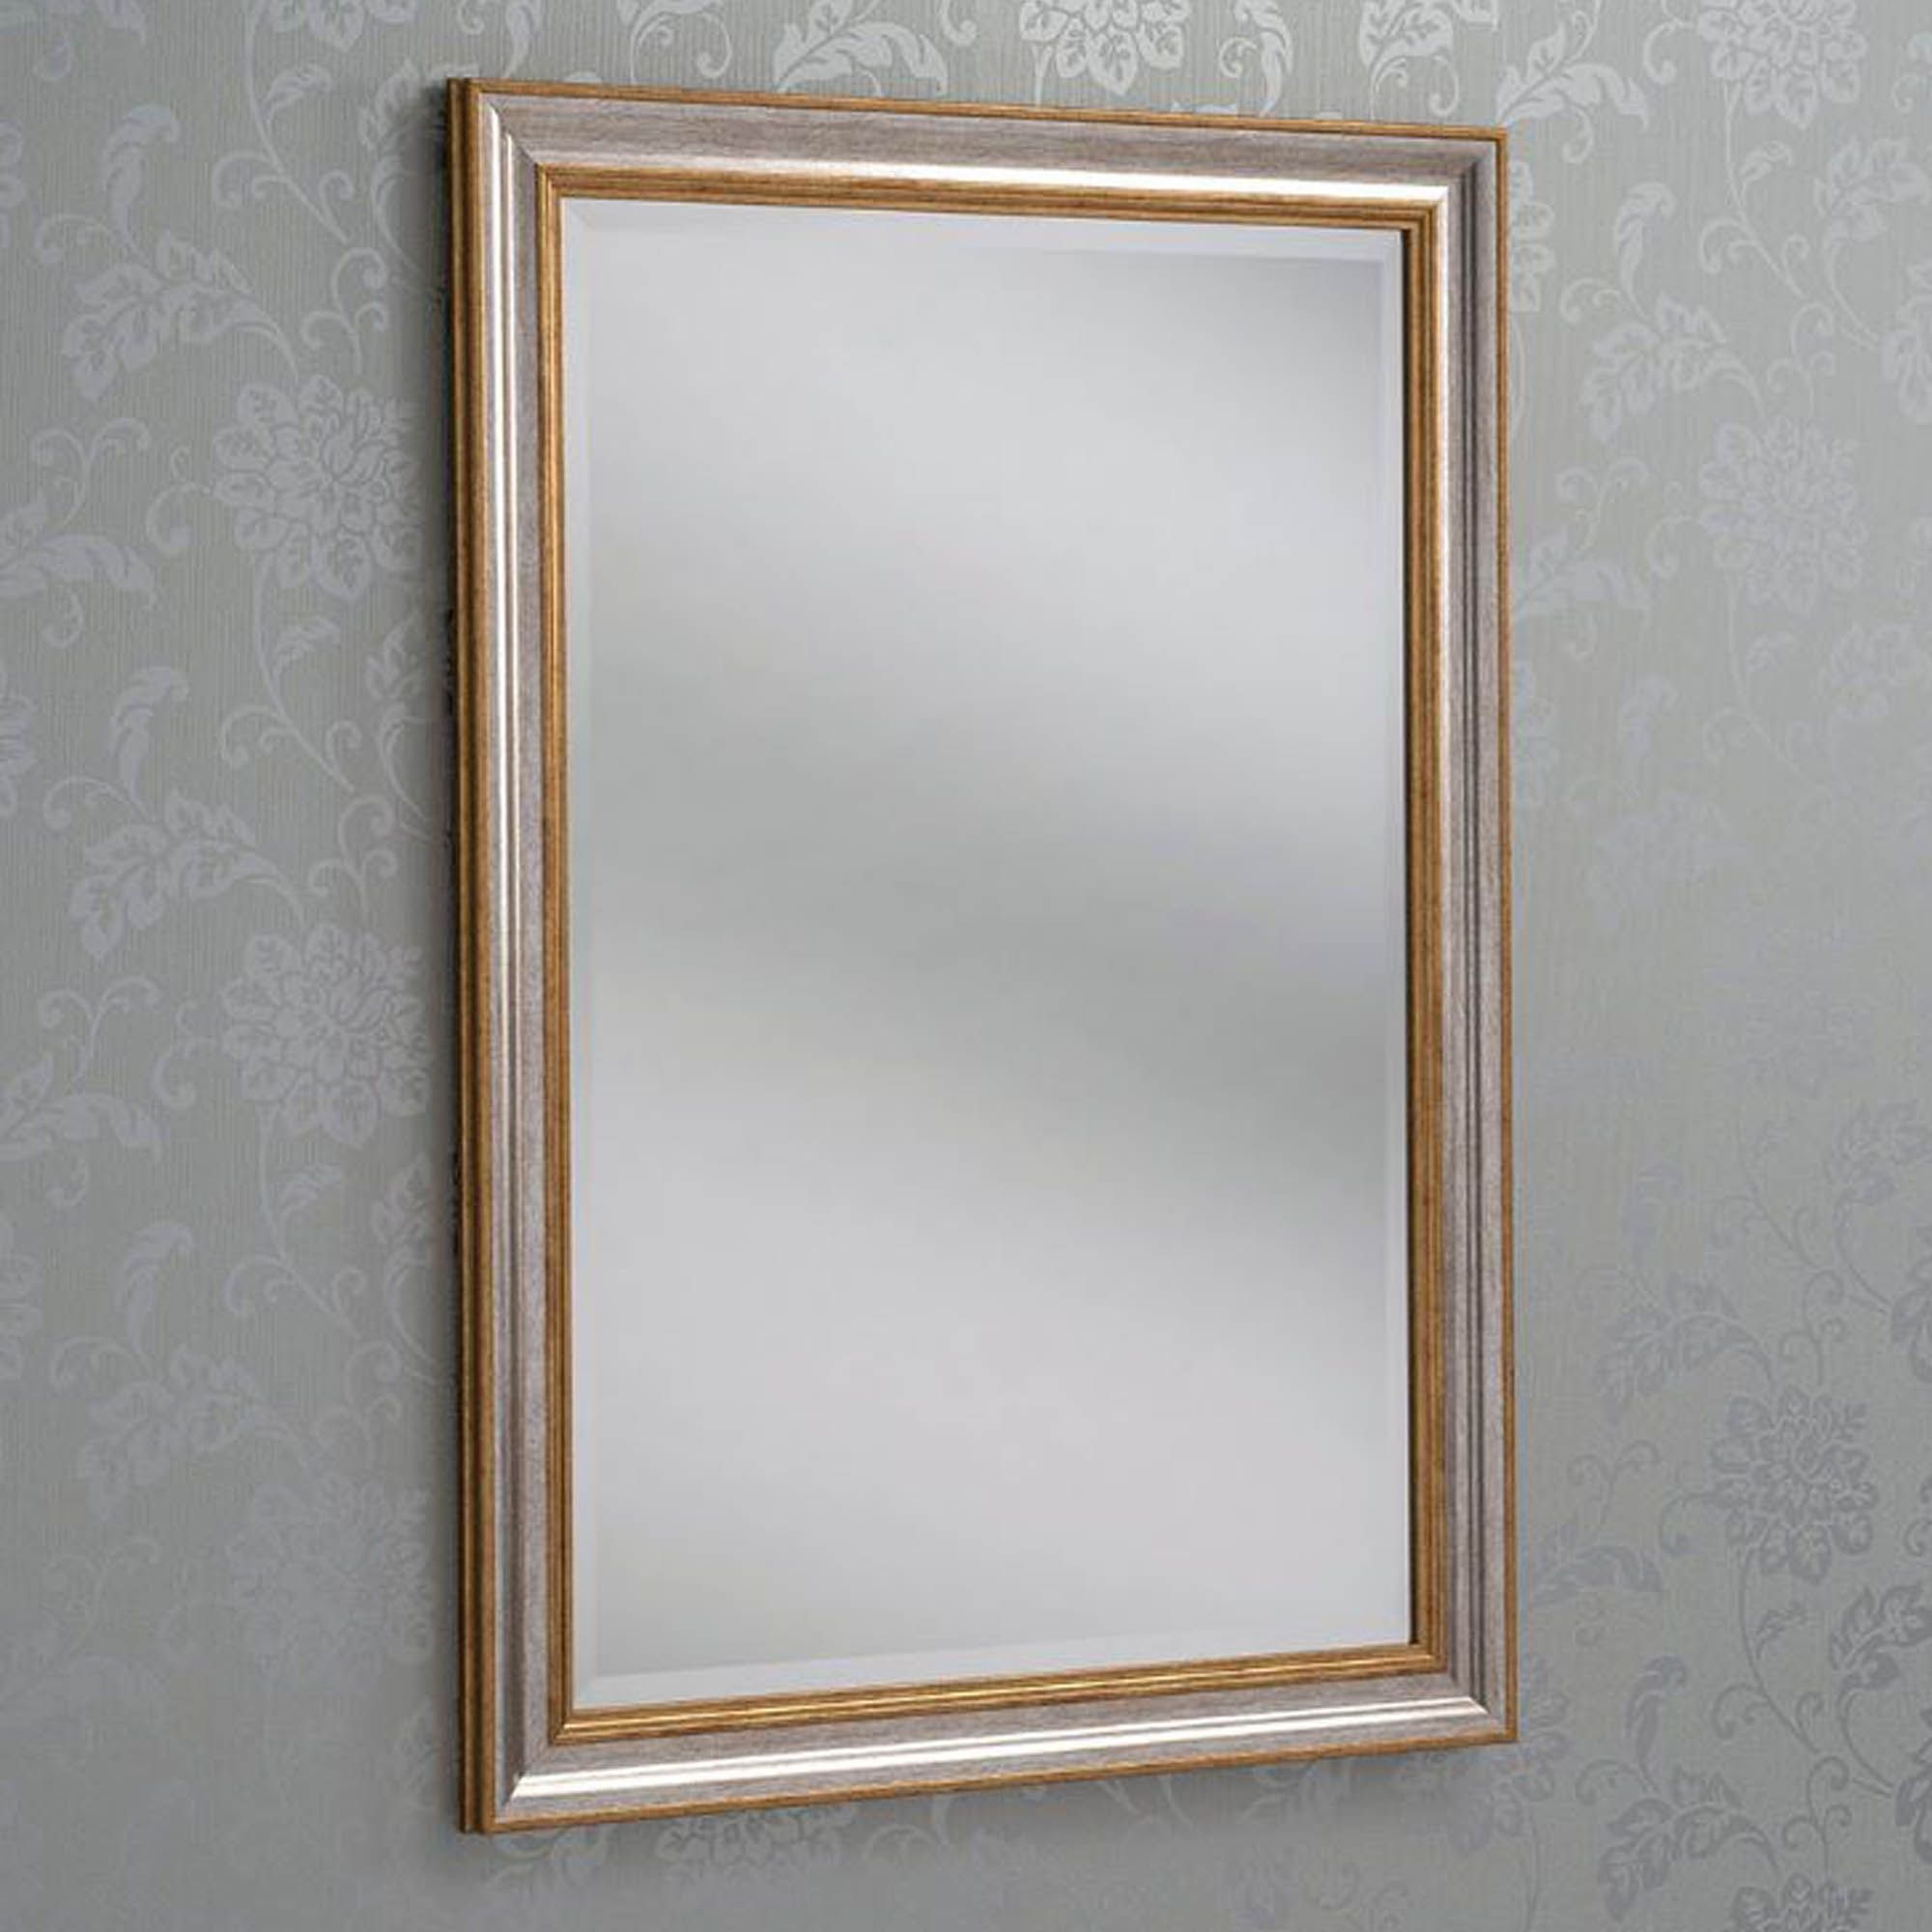 Gold & Silver Rectangular Wall Mirror | Wall Mirror Hd365 Intended For Brushed Gold Rectangular Framed Wall Mirrors (View 2 of 15)